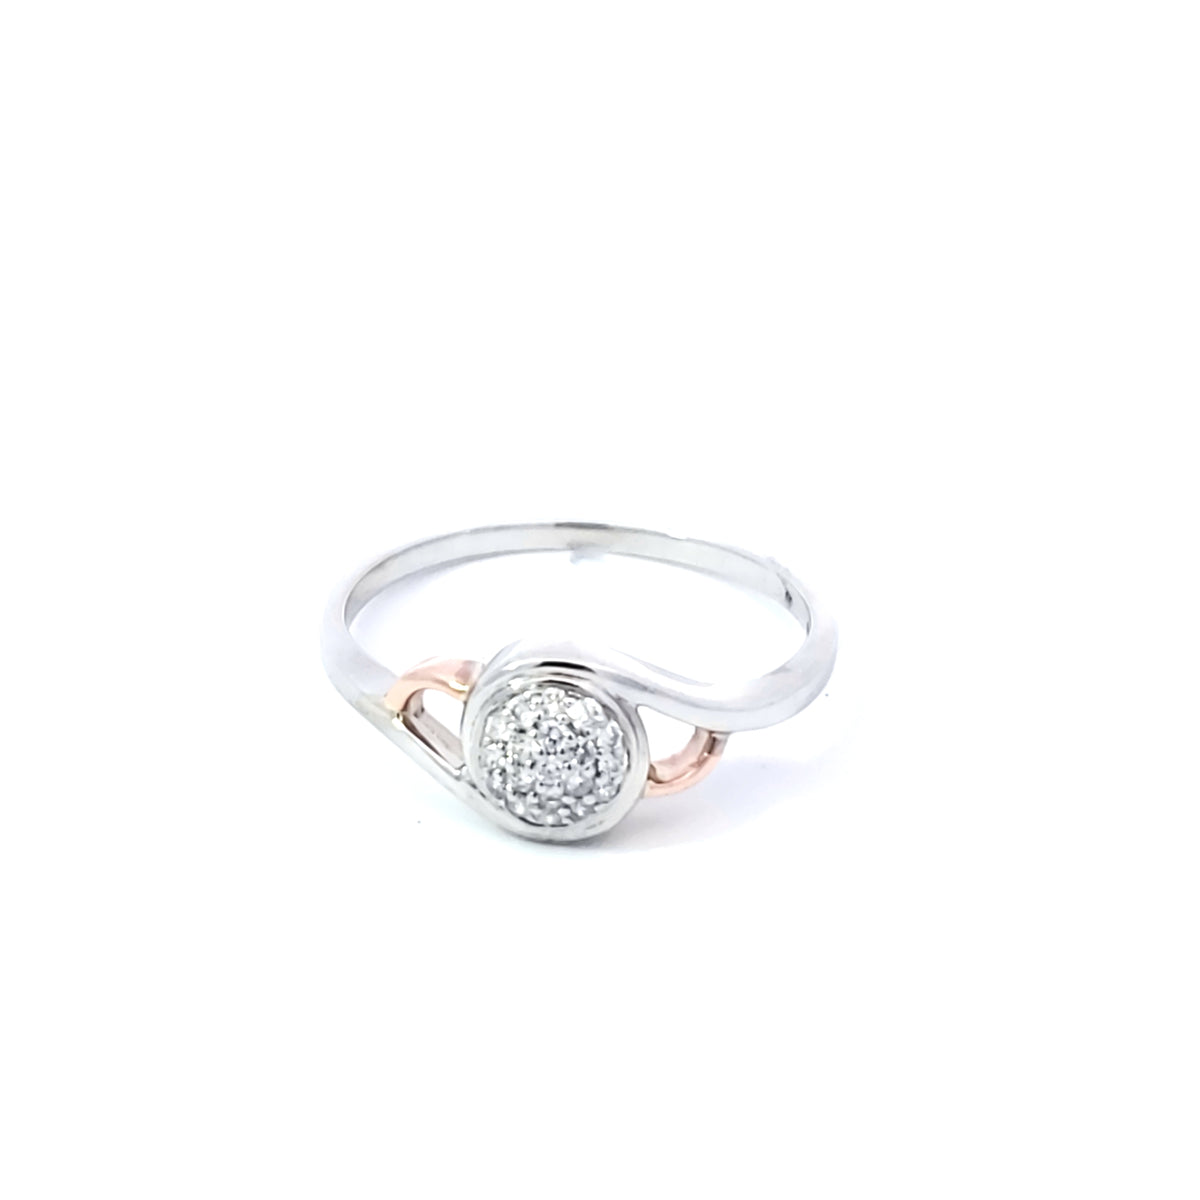 10K White and Rose Gold 0.102 cttw Diamond Ring